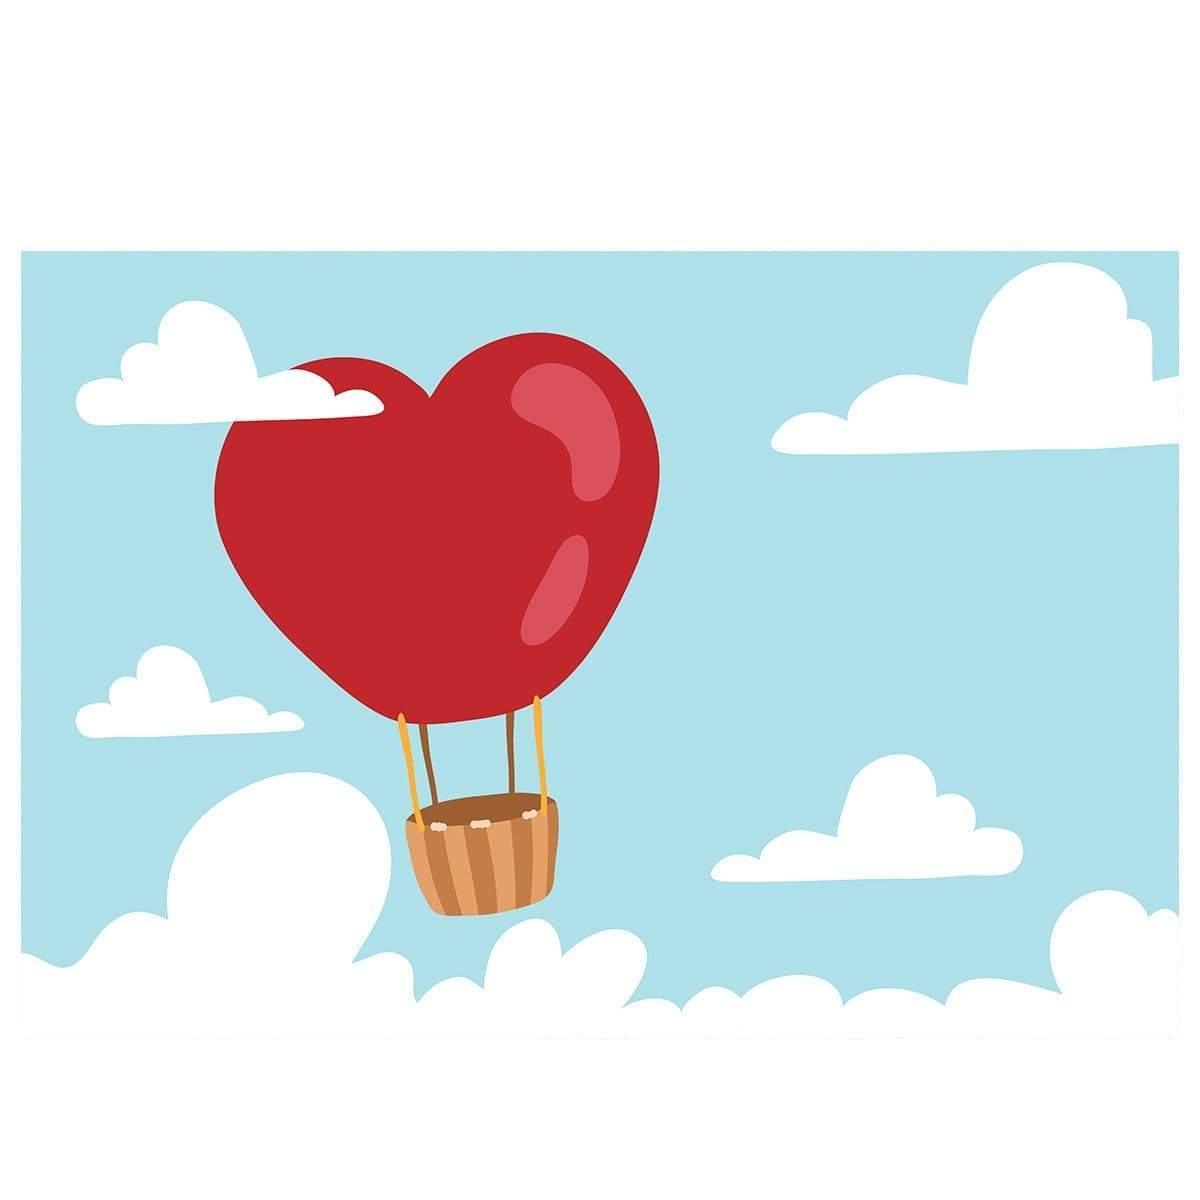 Allenjoy Valentine Day Backdrop with Red Heart Hot Air Balloon Photography - Allenjoystudio